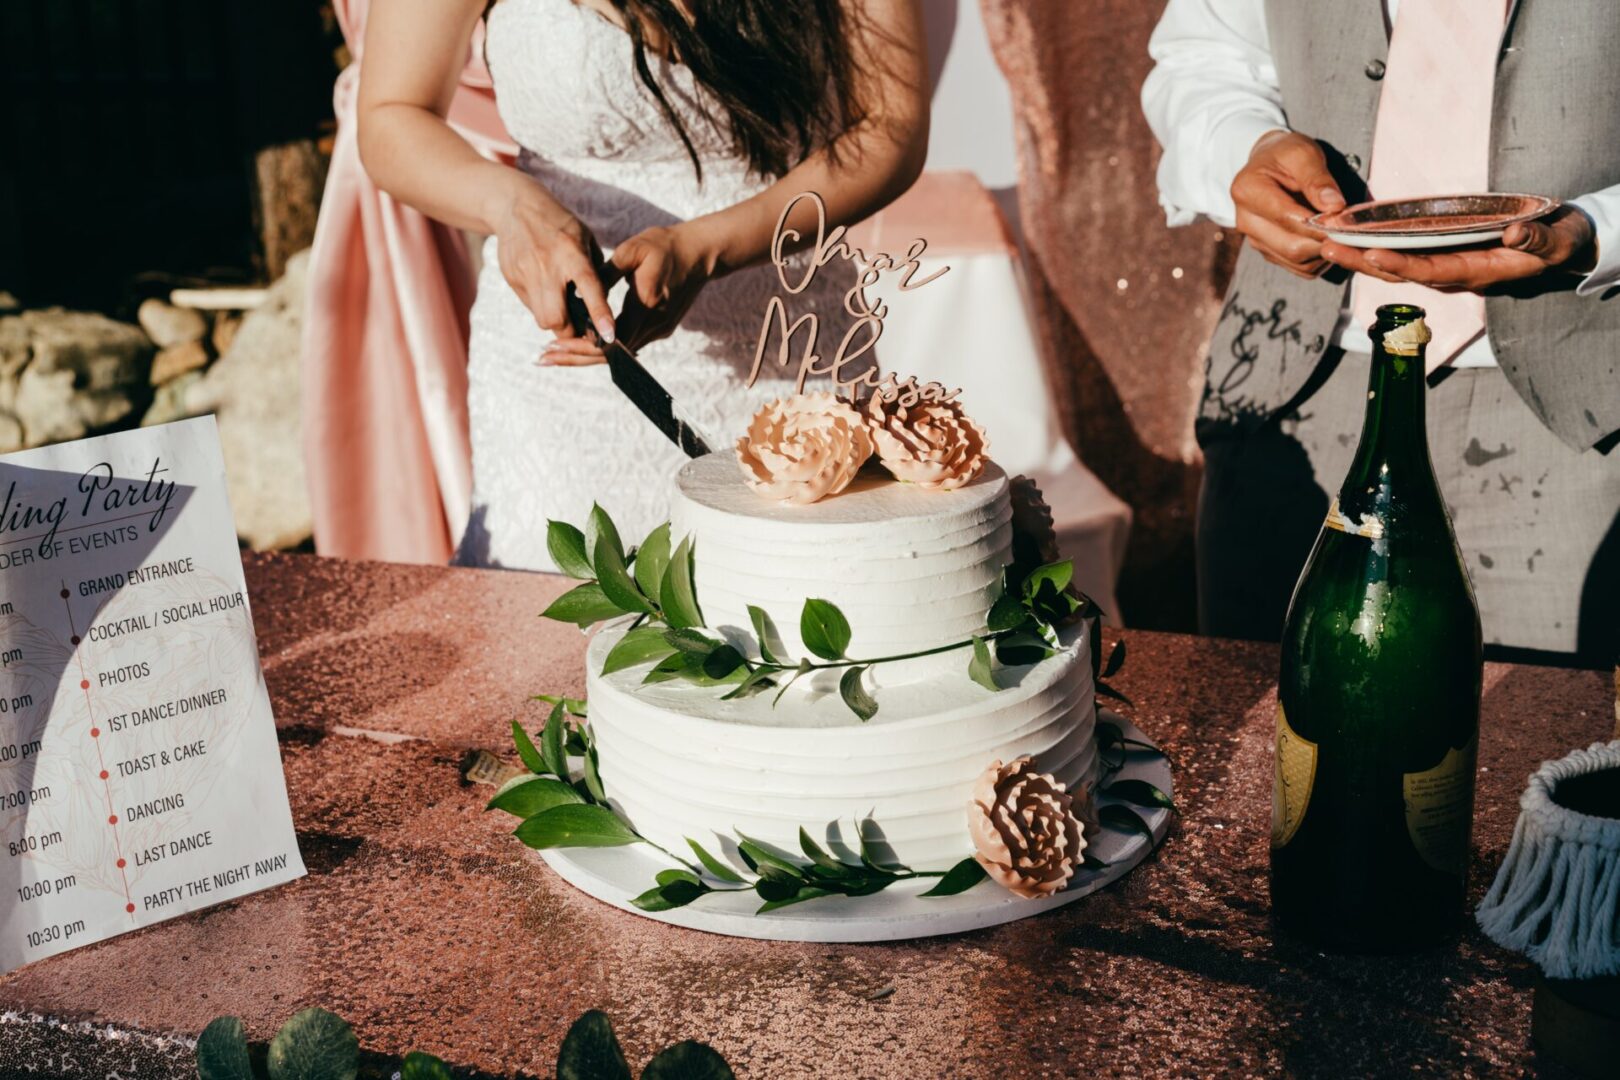 a bride cutting her wedding cake for serving